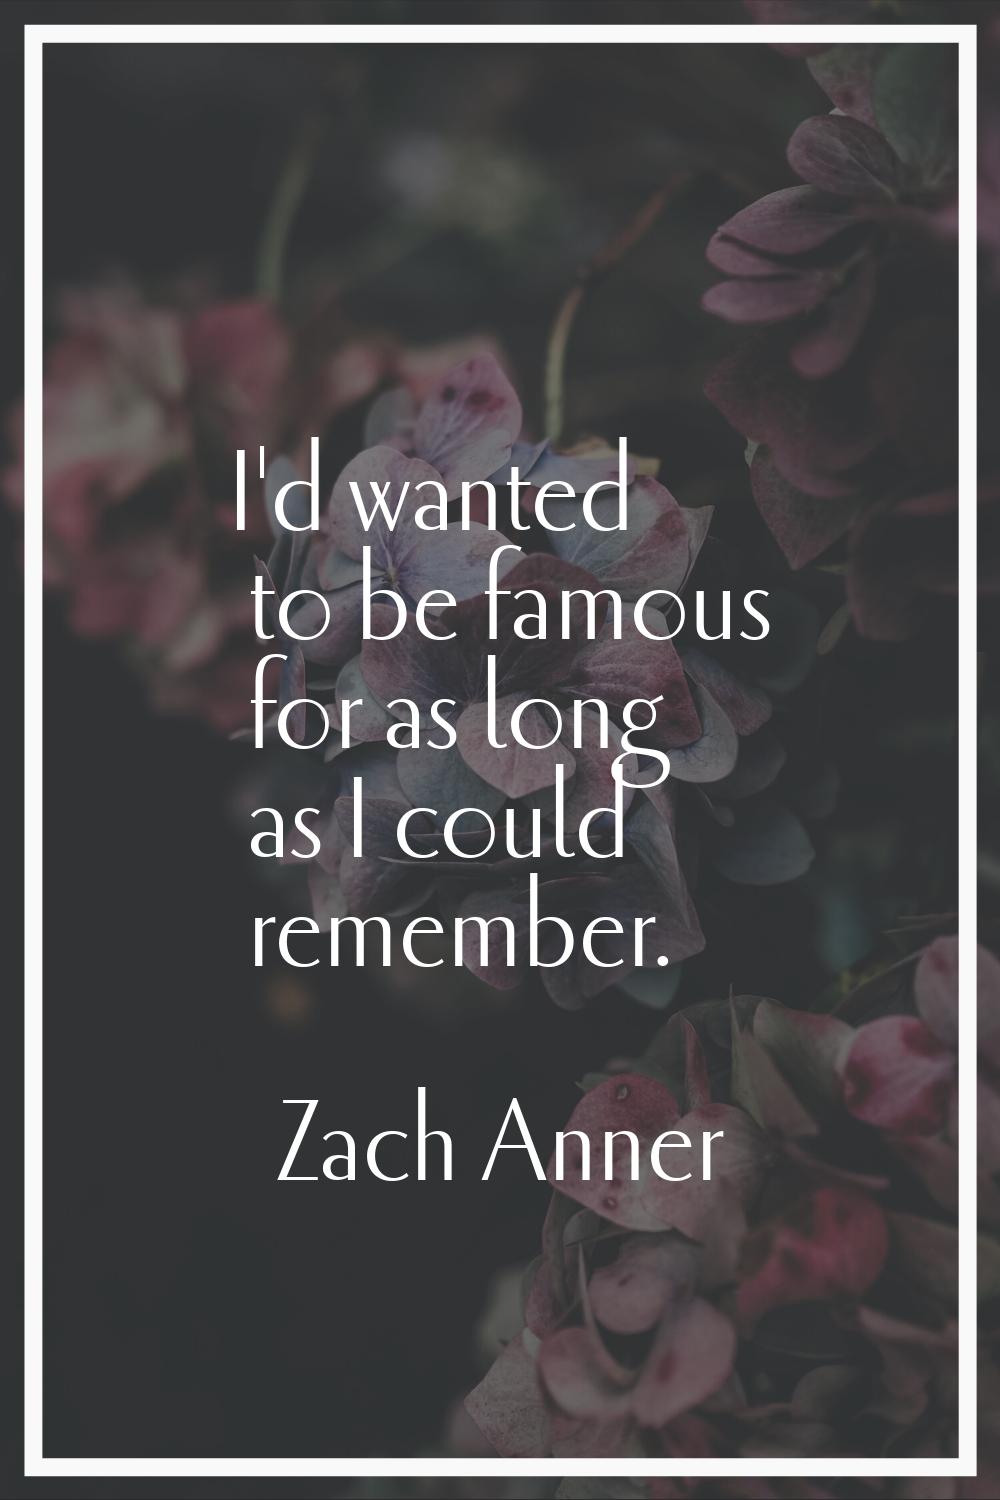 I'd wanted to be famous for as long as I could remember.